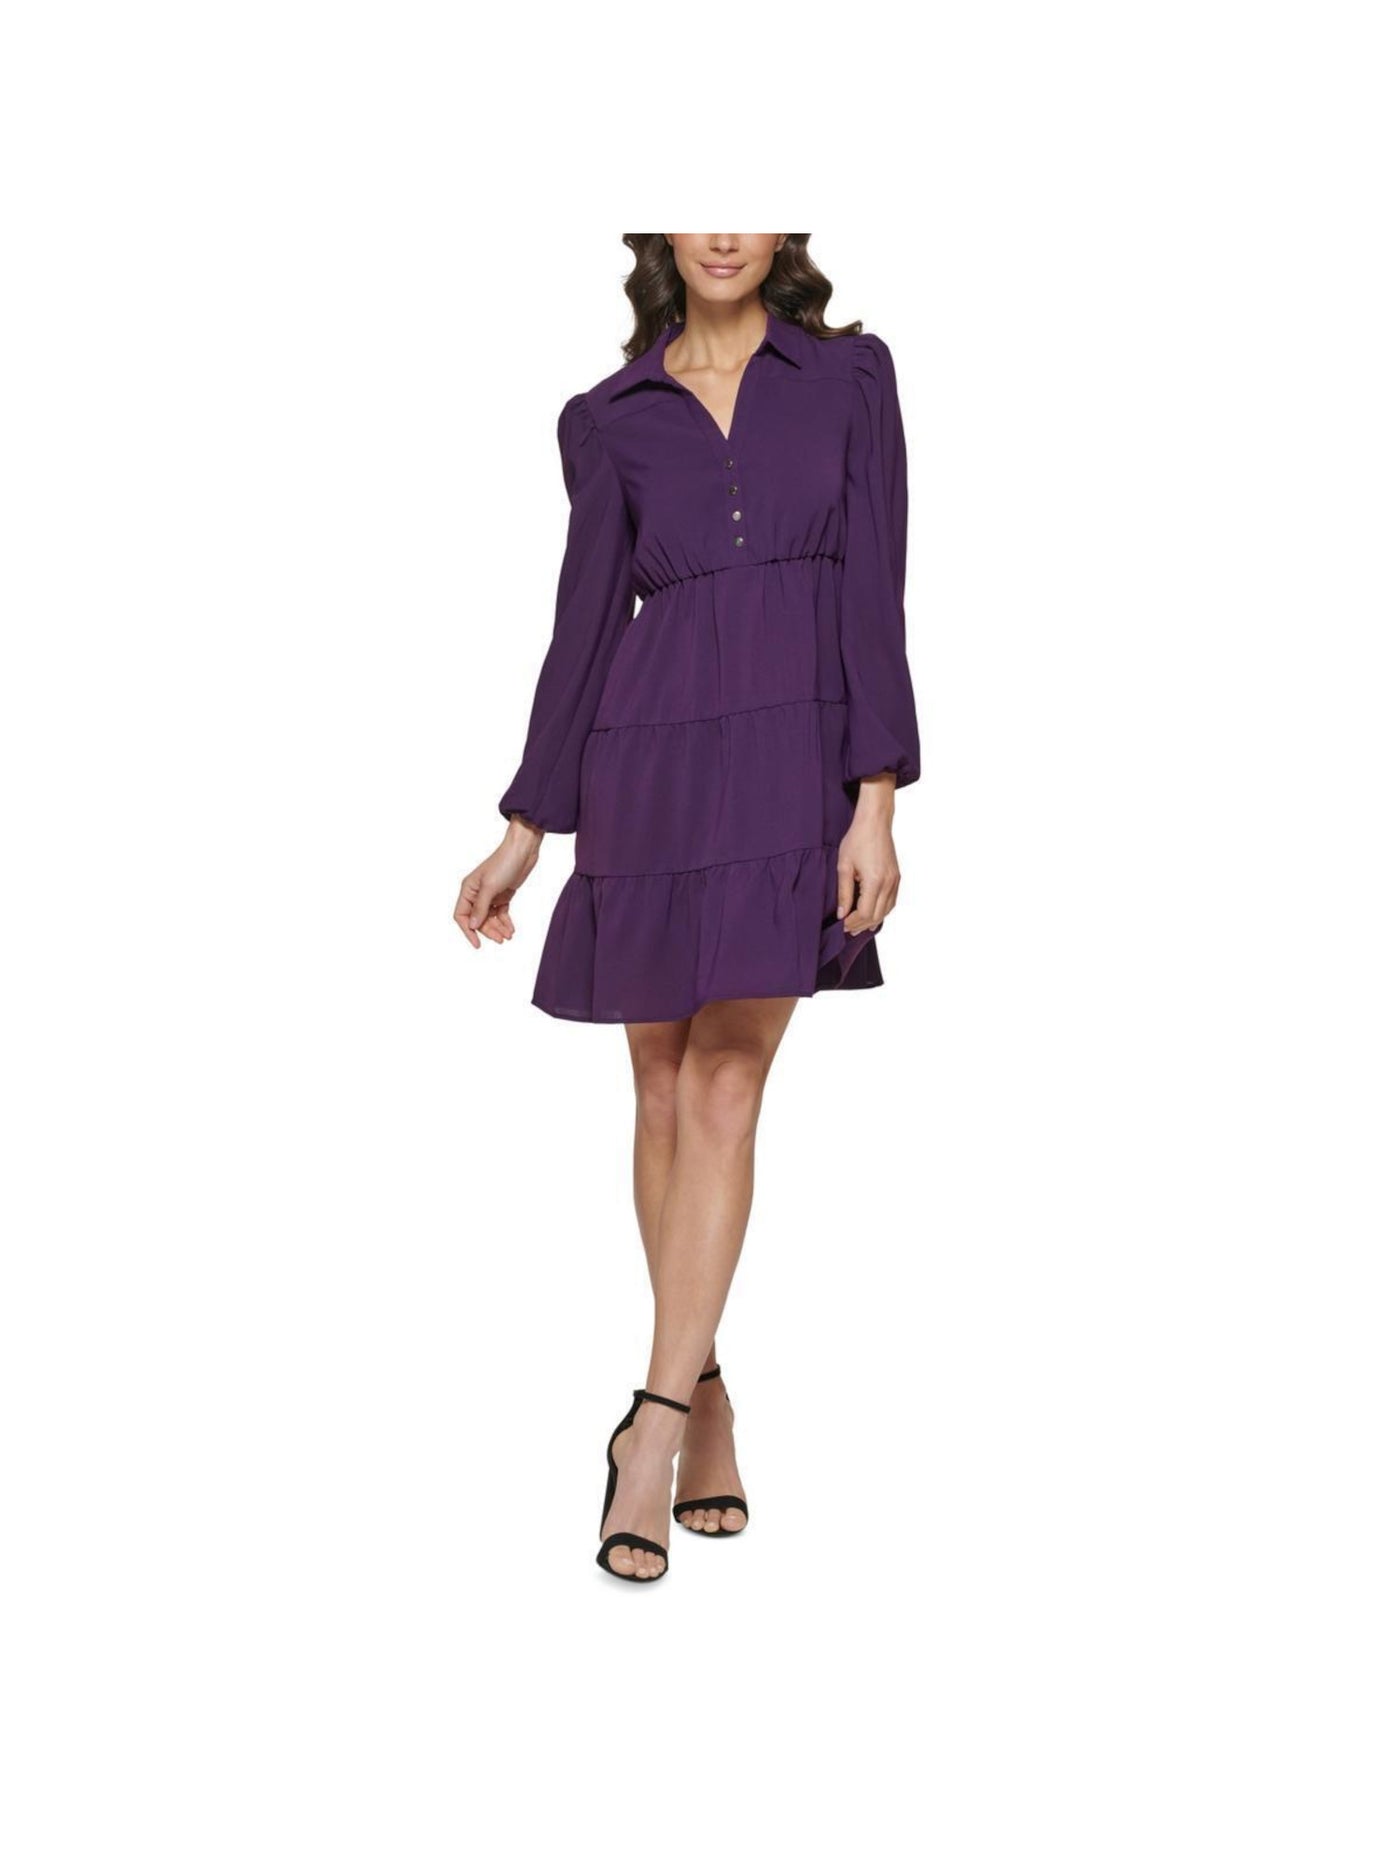 KENSIE DRESSES Womens Purple Stretch Sheer Pullover Styling Long Sleeve Collared Short Wear To Work Shift Dress 12